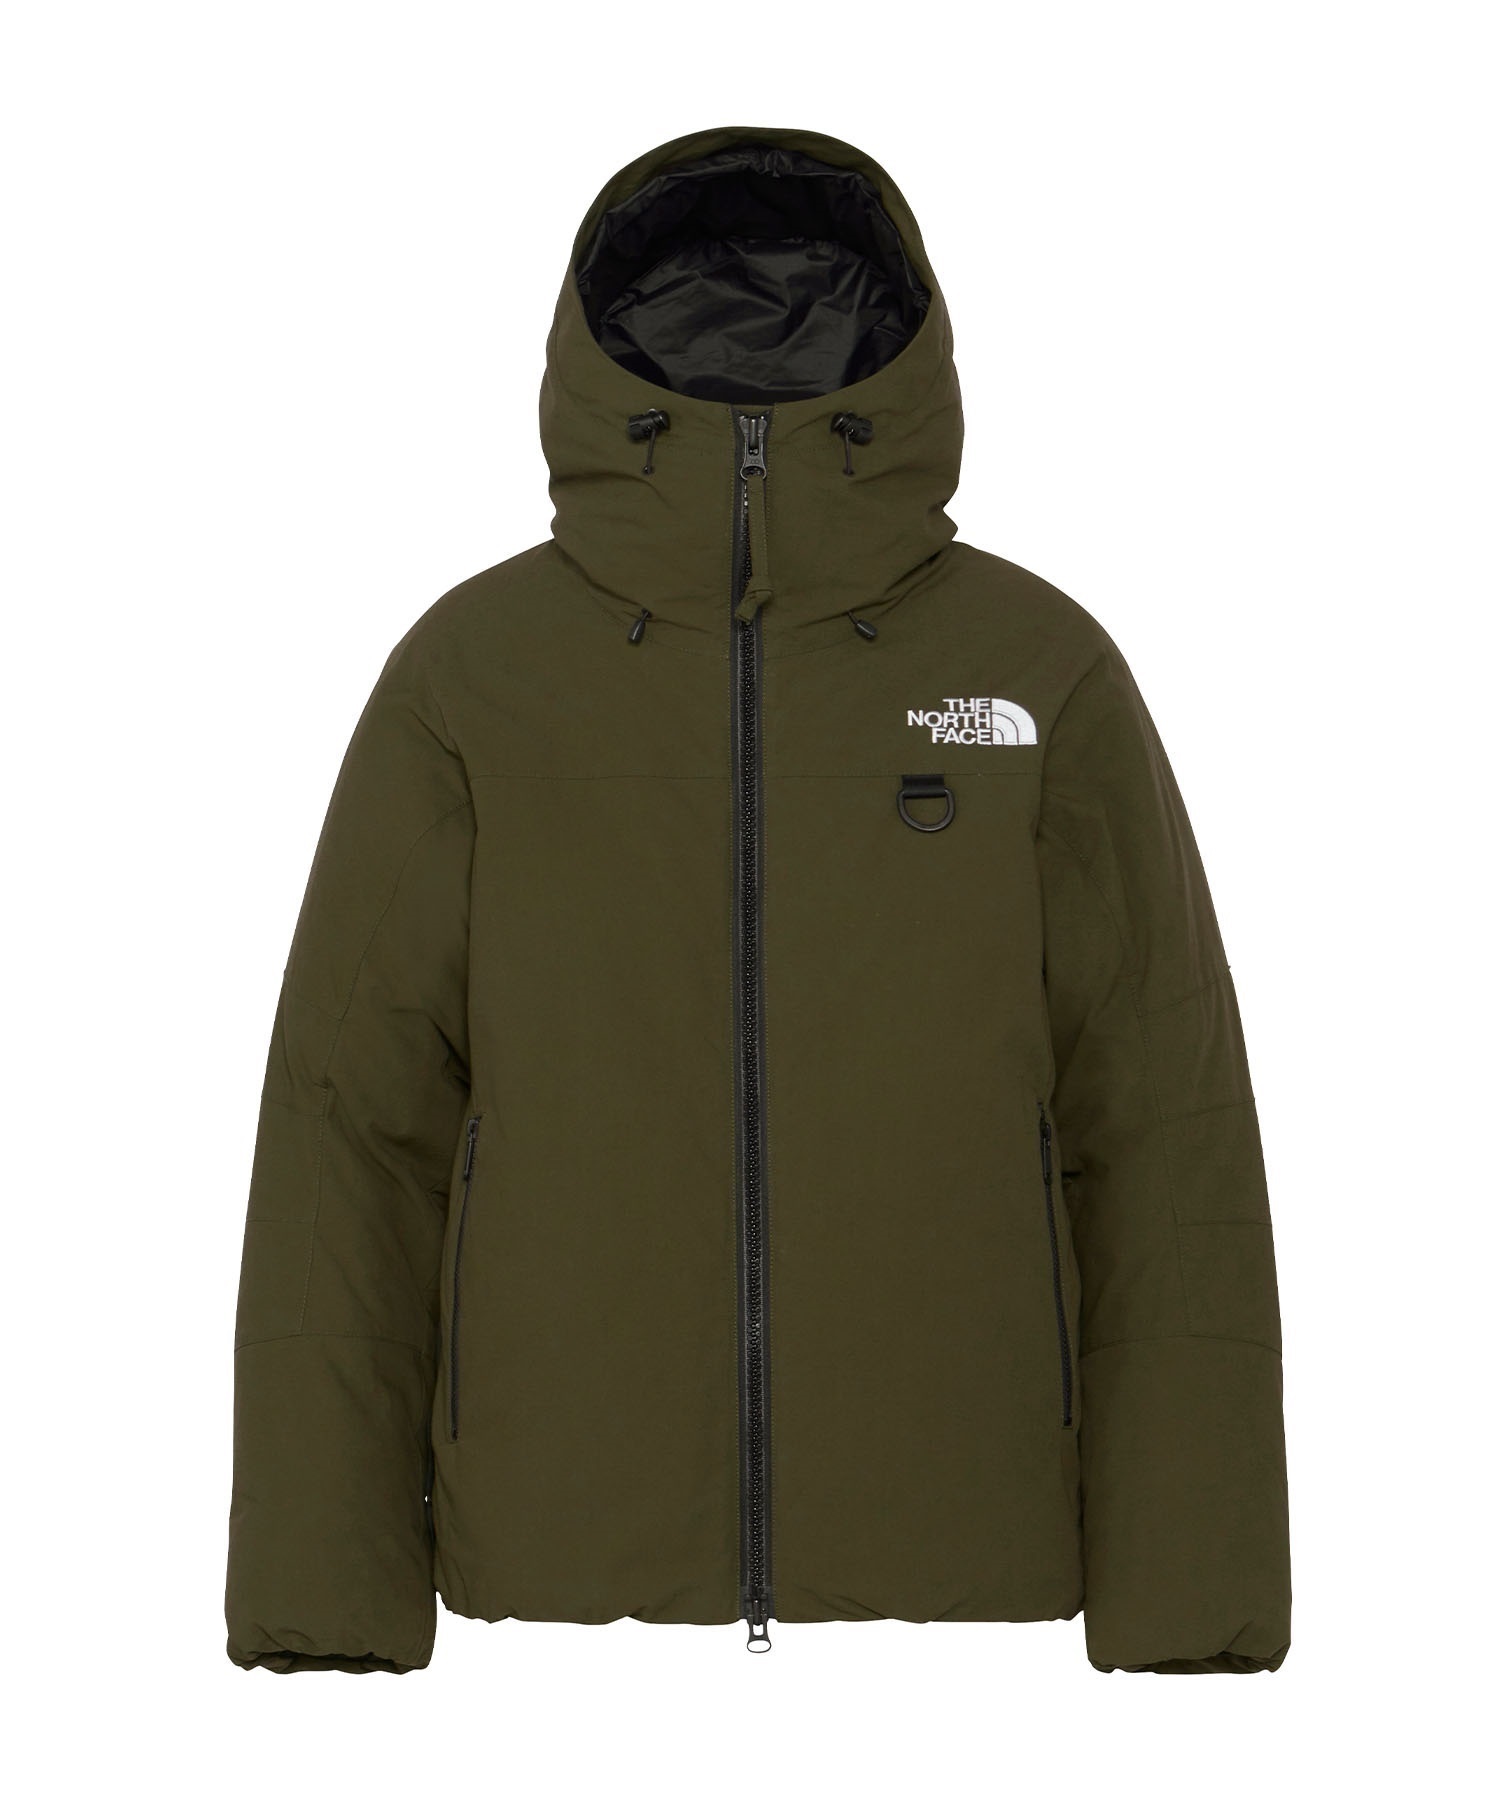 THE NORTH FACE/ノース・フェイス FIREFLY INSULATED PARKA ファイヤー 